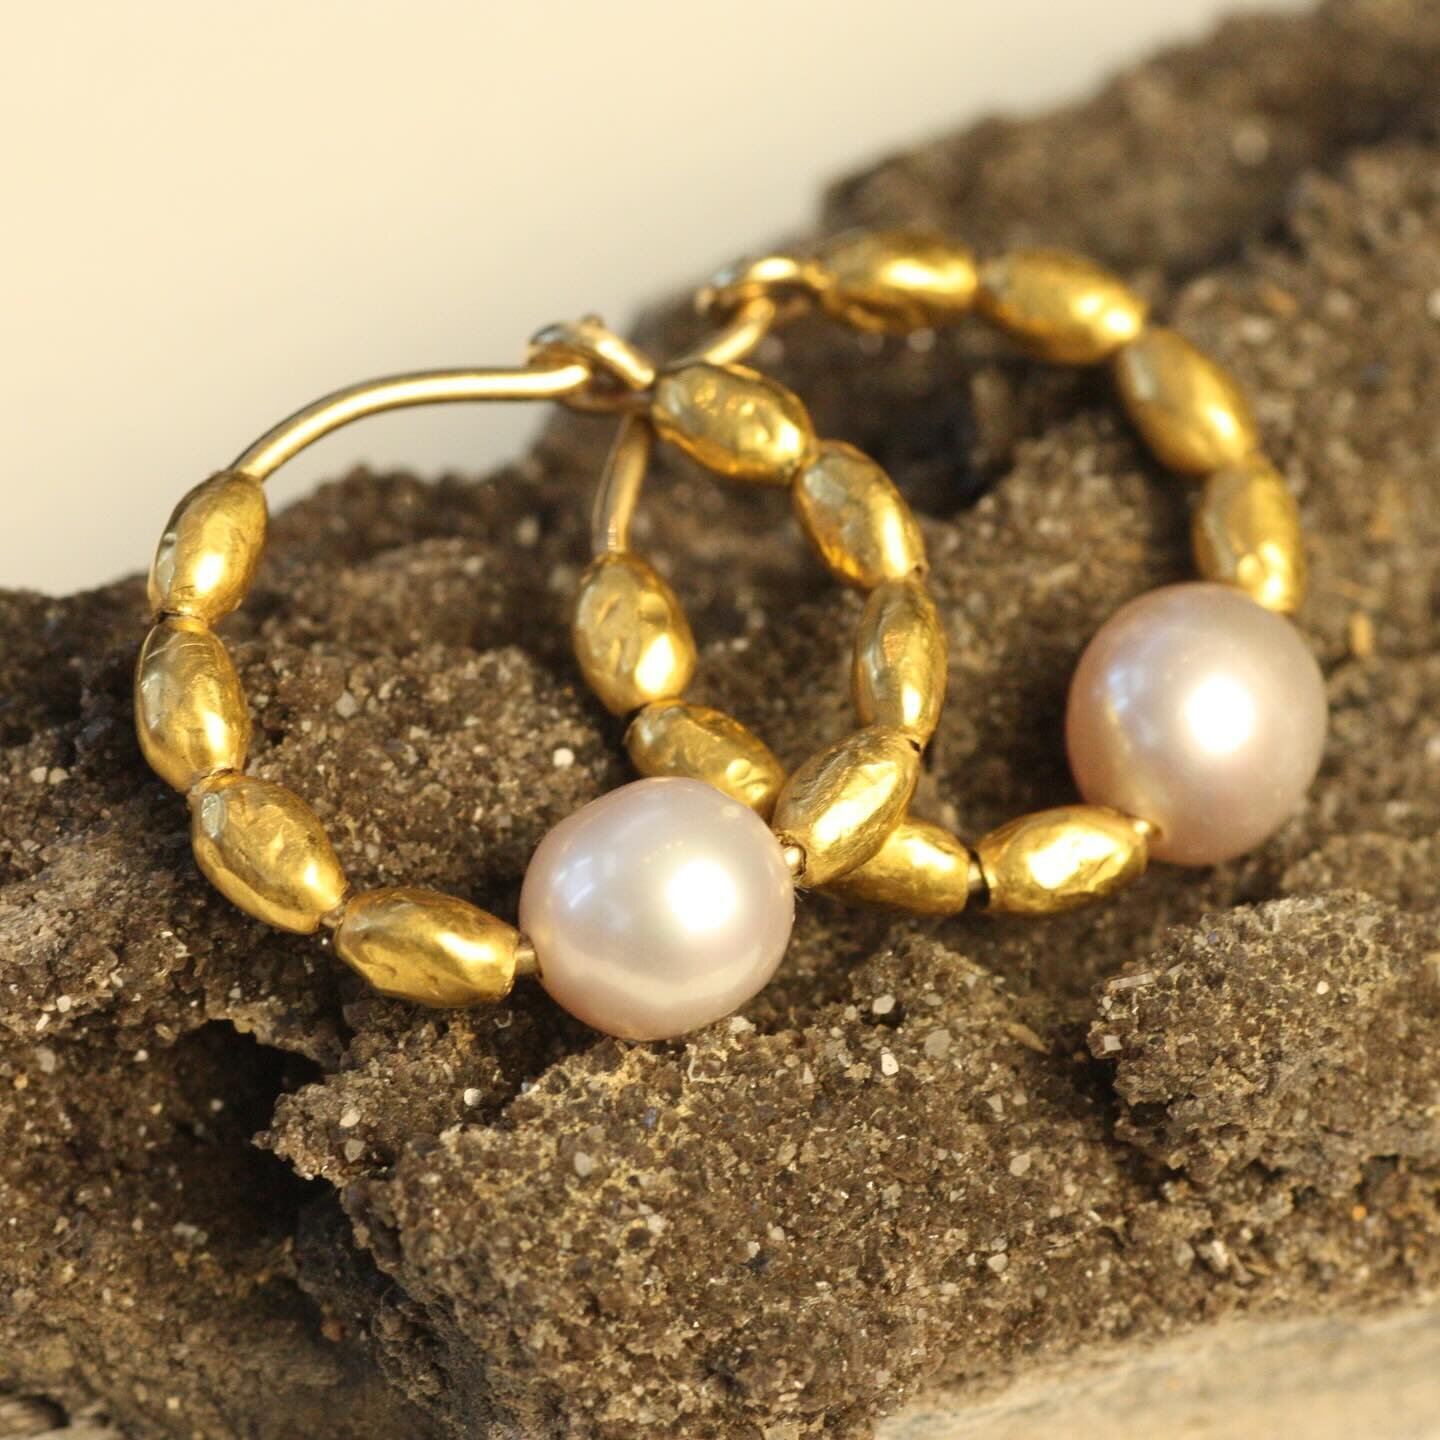 A closer look at our gold nugget &amp; freshwater pearl hoop earrings. Made in Venice, California.

#nuggetjewelry #goldnuggetjewelry #hoopearrings #pearlearrings #pearlhoopearrings #pearljewelry #nuggetearrings #weddingjewelry #matchingjewelryset #c